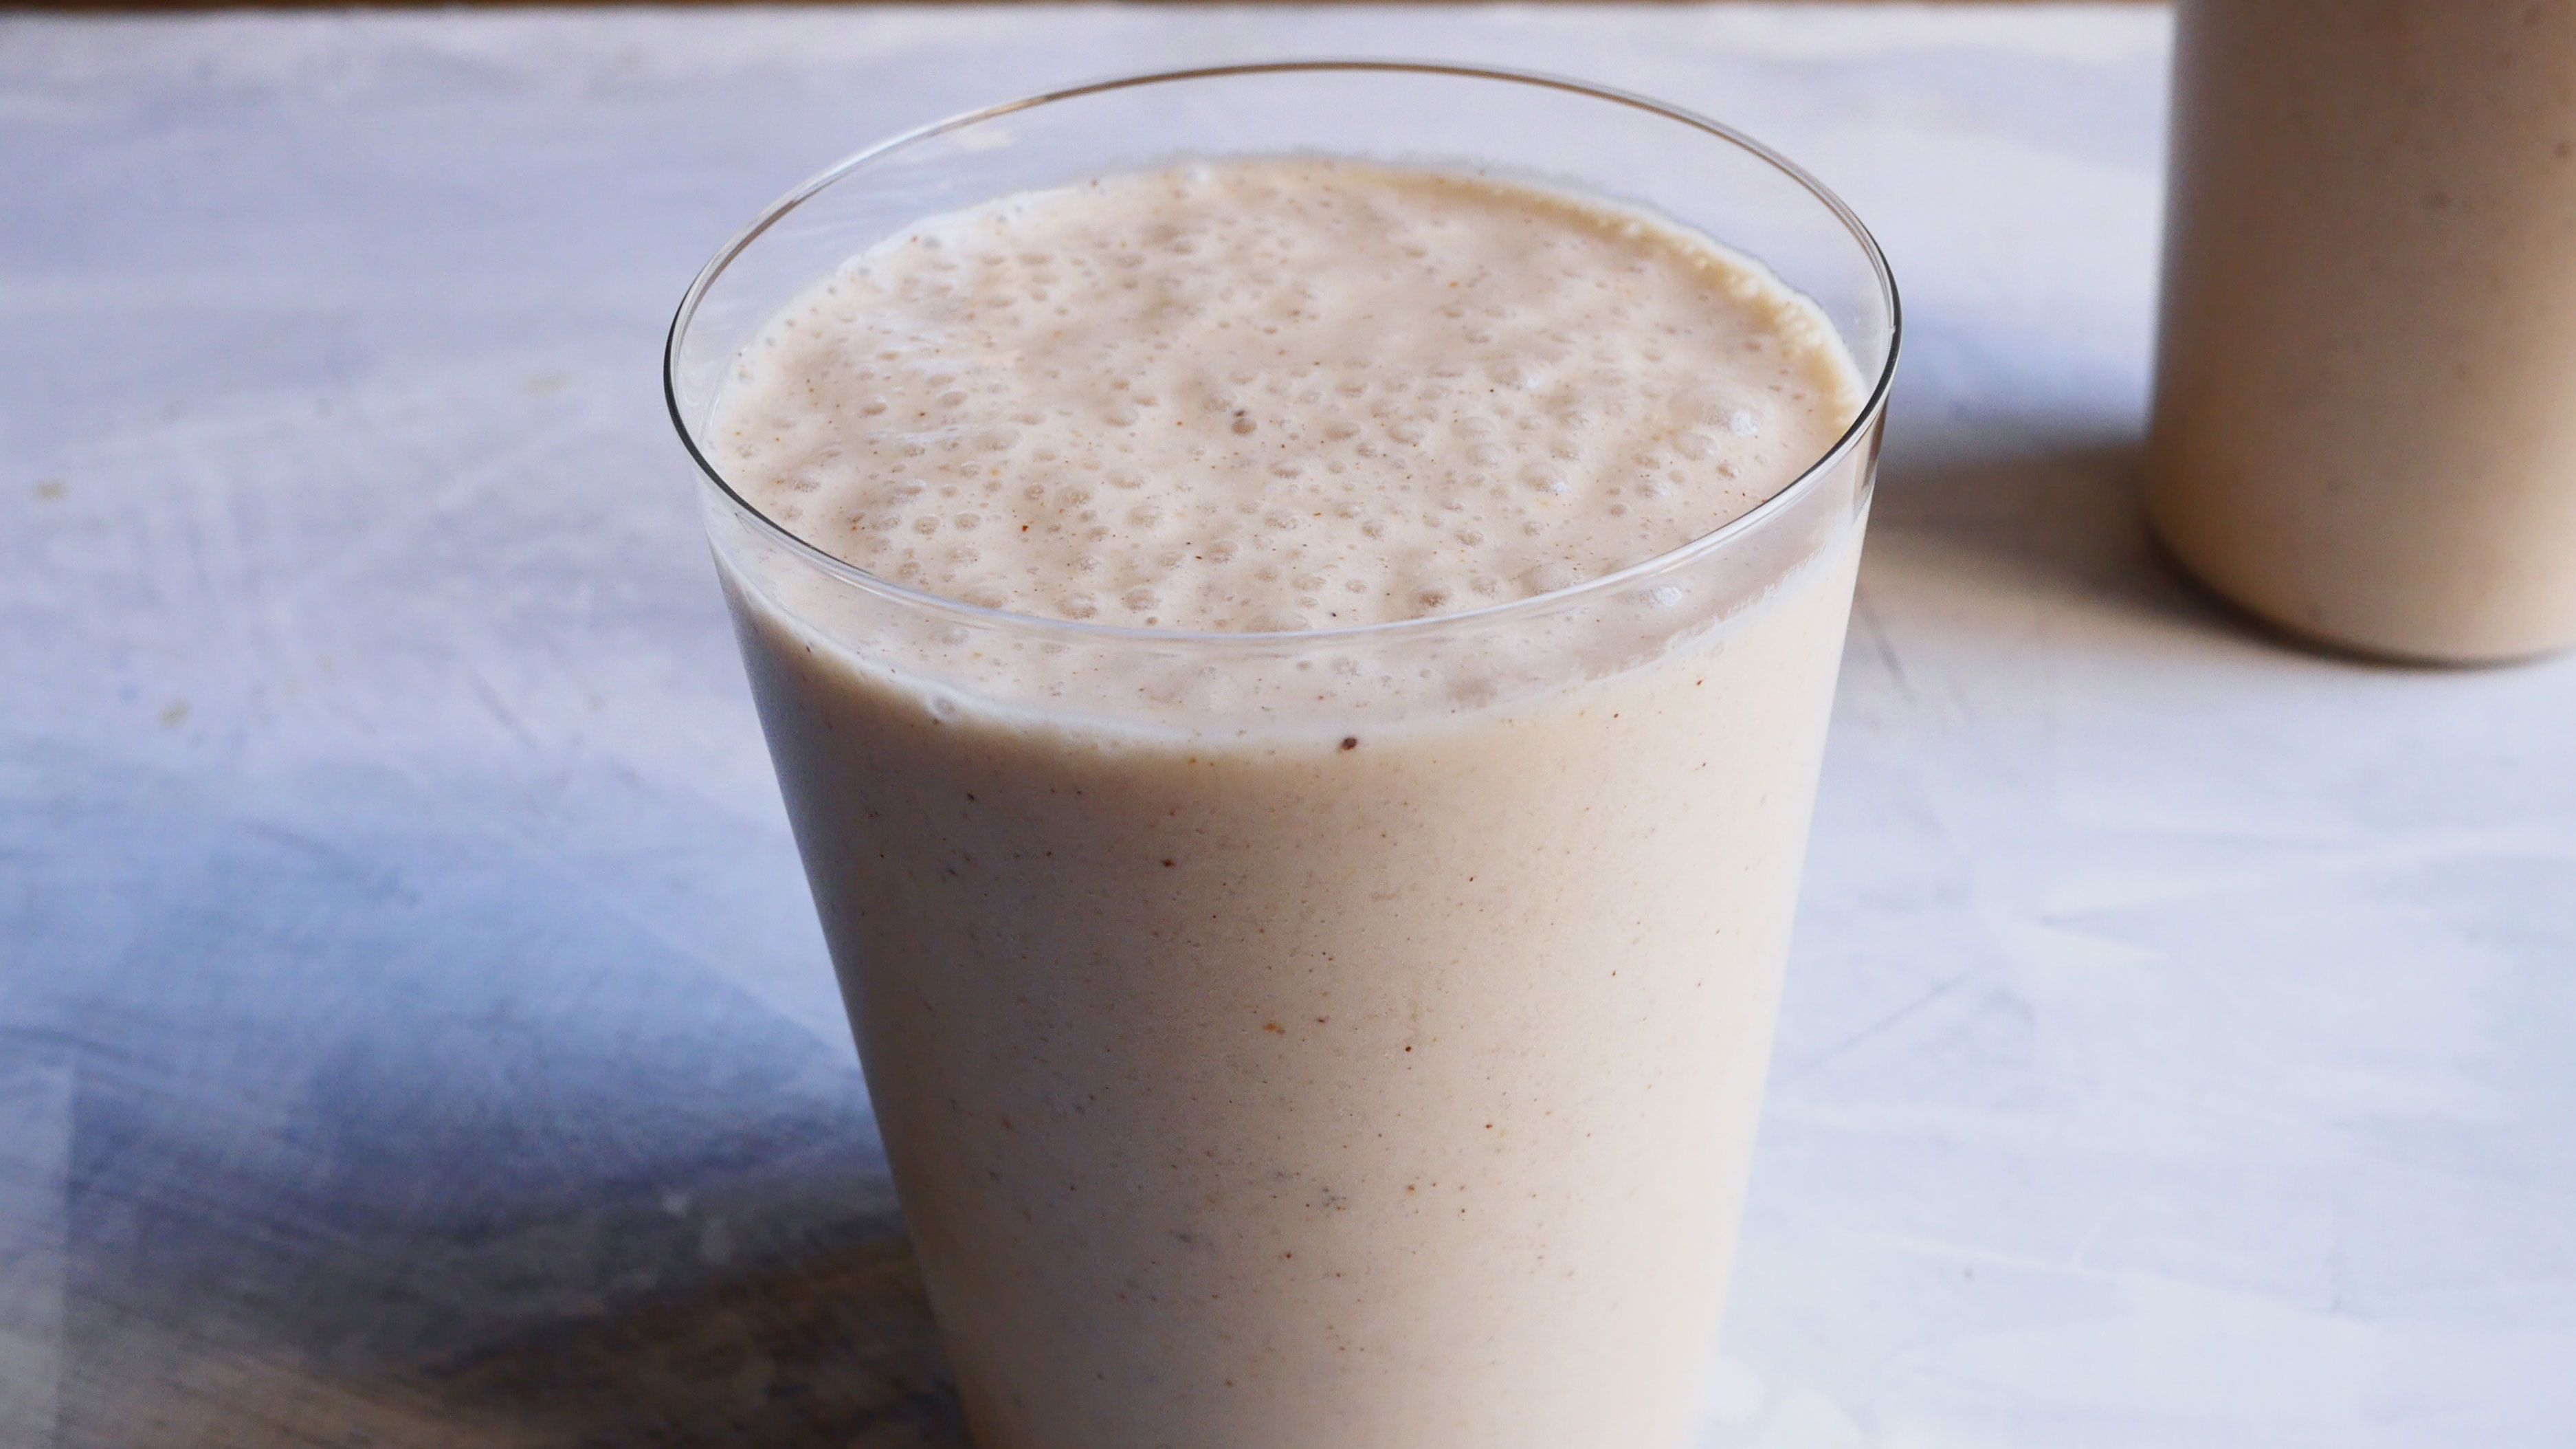 Peanut Butter Banana Smoothie Recipe - How To Make Healthy PB Smoothie